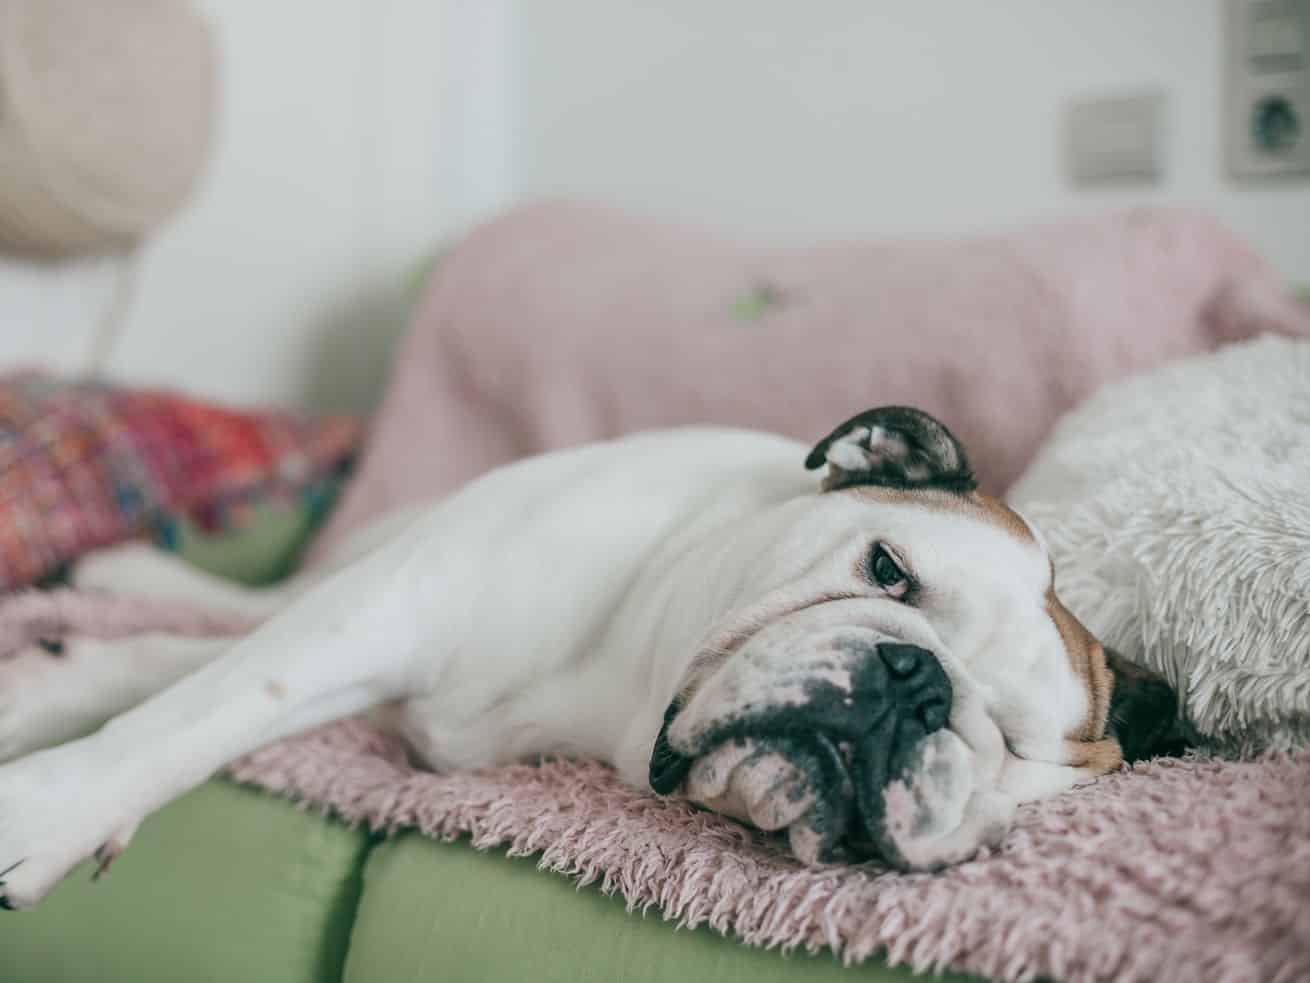 Our pets are anxious. Is CBD the answer?